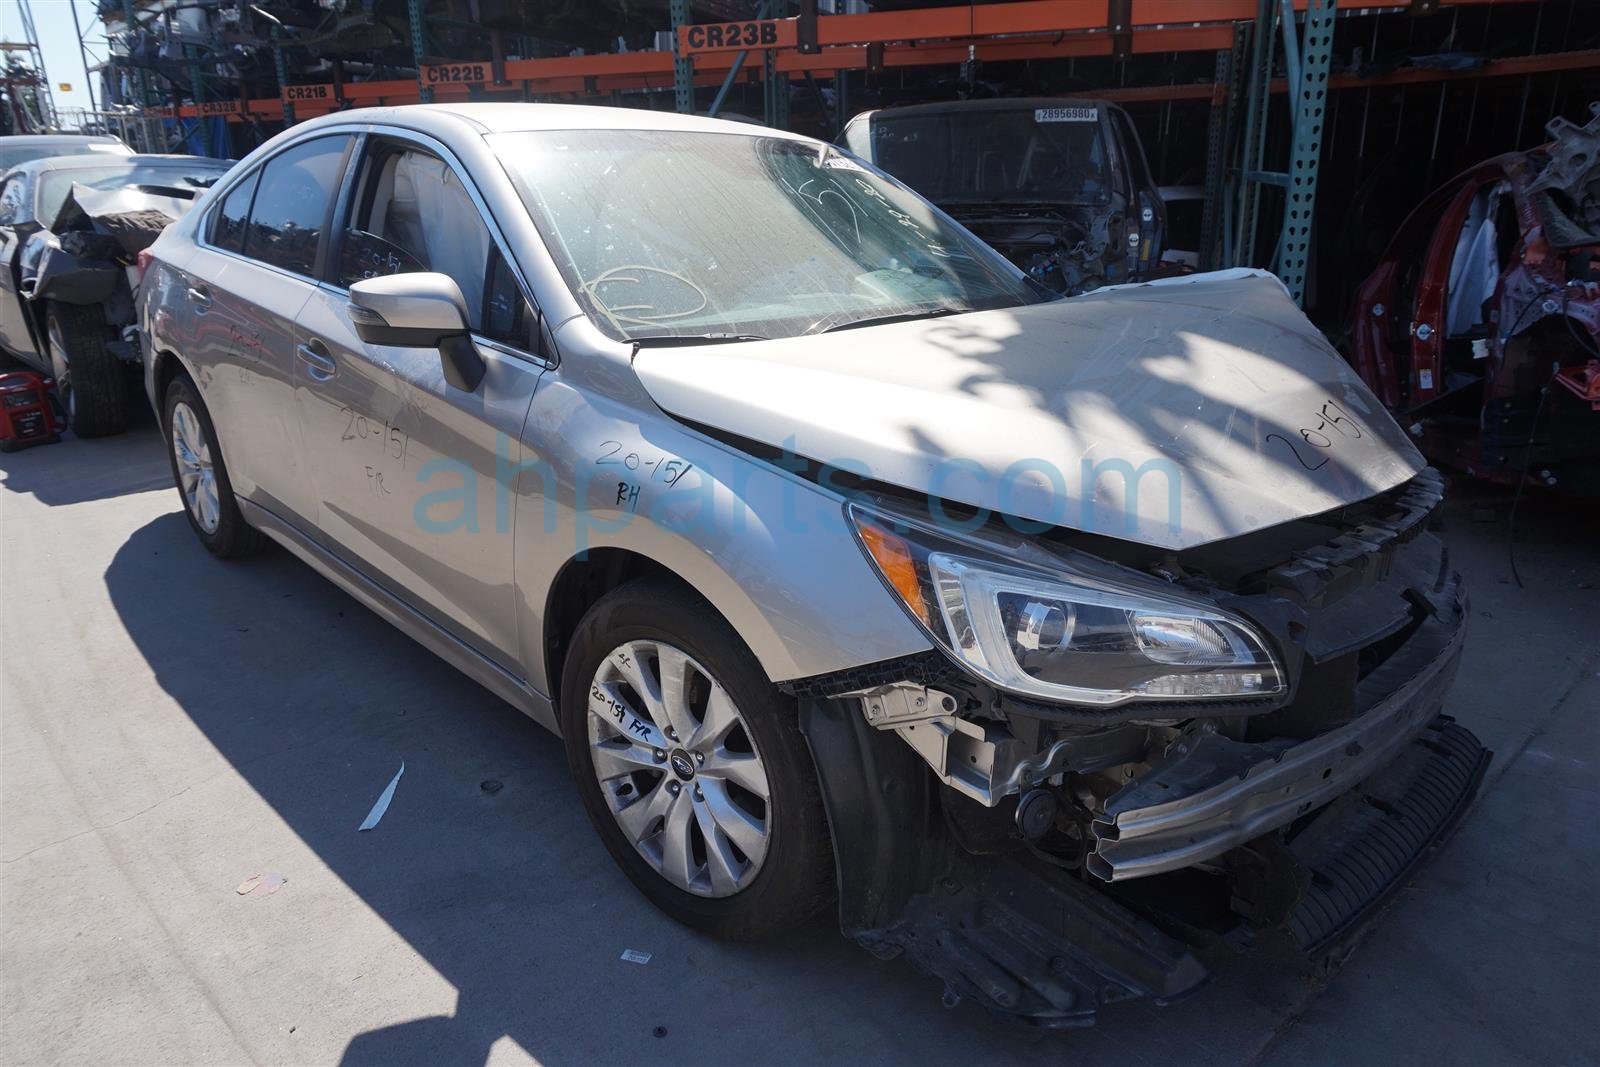 2017 Subaru Outback Legacy Replacement Parts